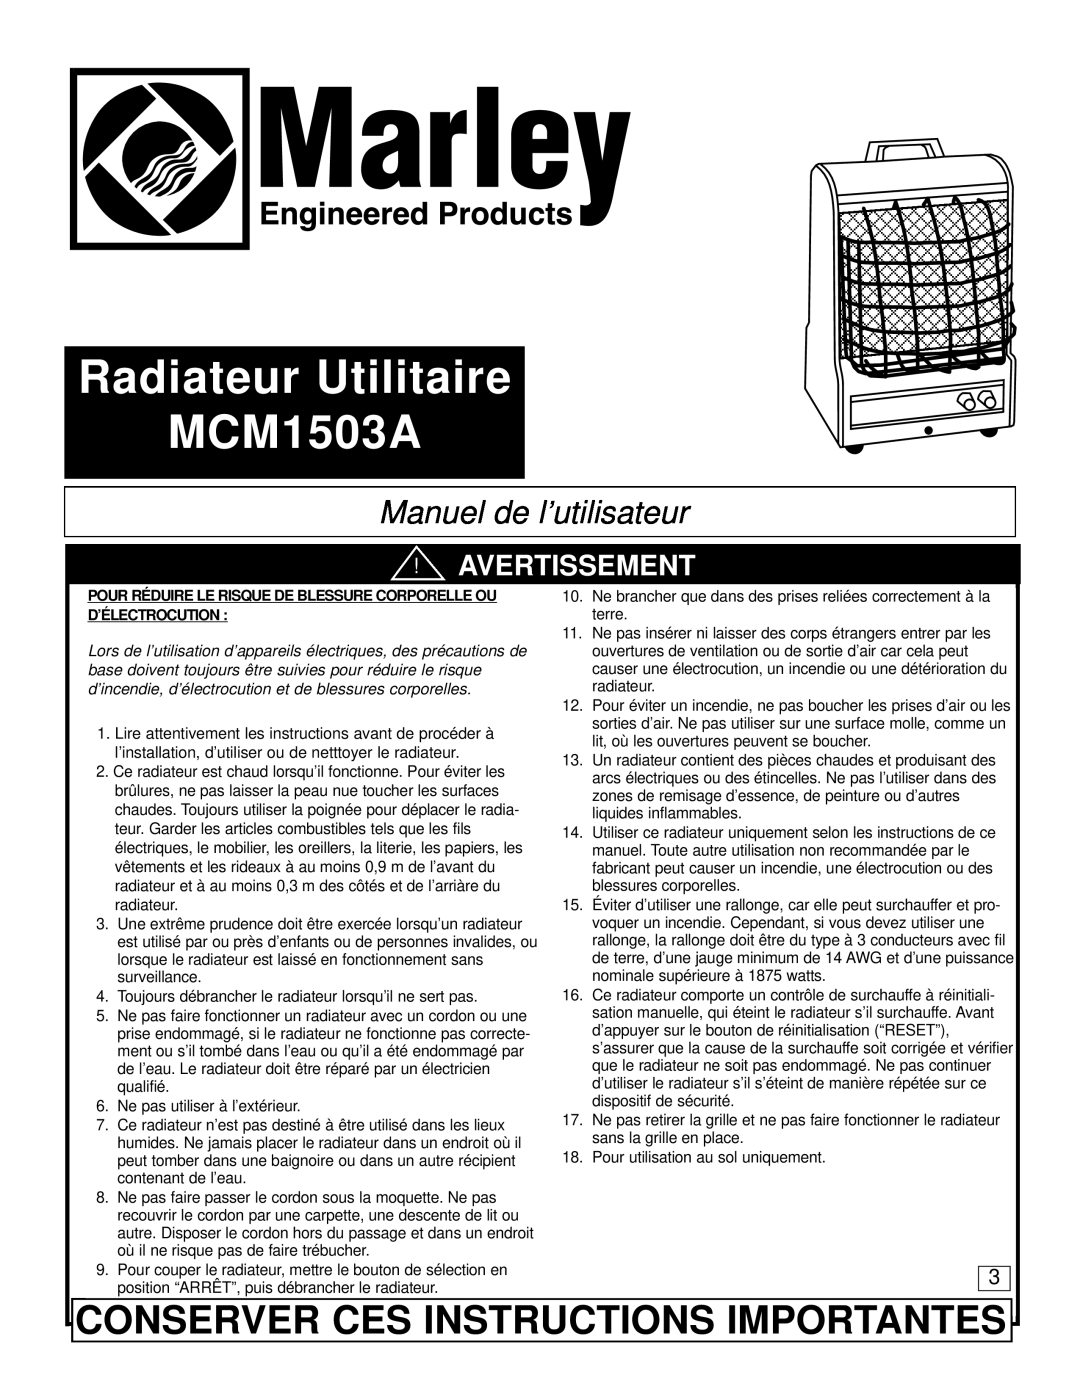 Marley Engineered Products manual Radiateur Utilitaire MCM1503A, Conserver Ces Instructions Importantes, Avertissement 